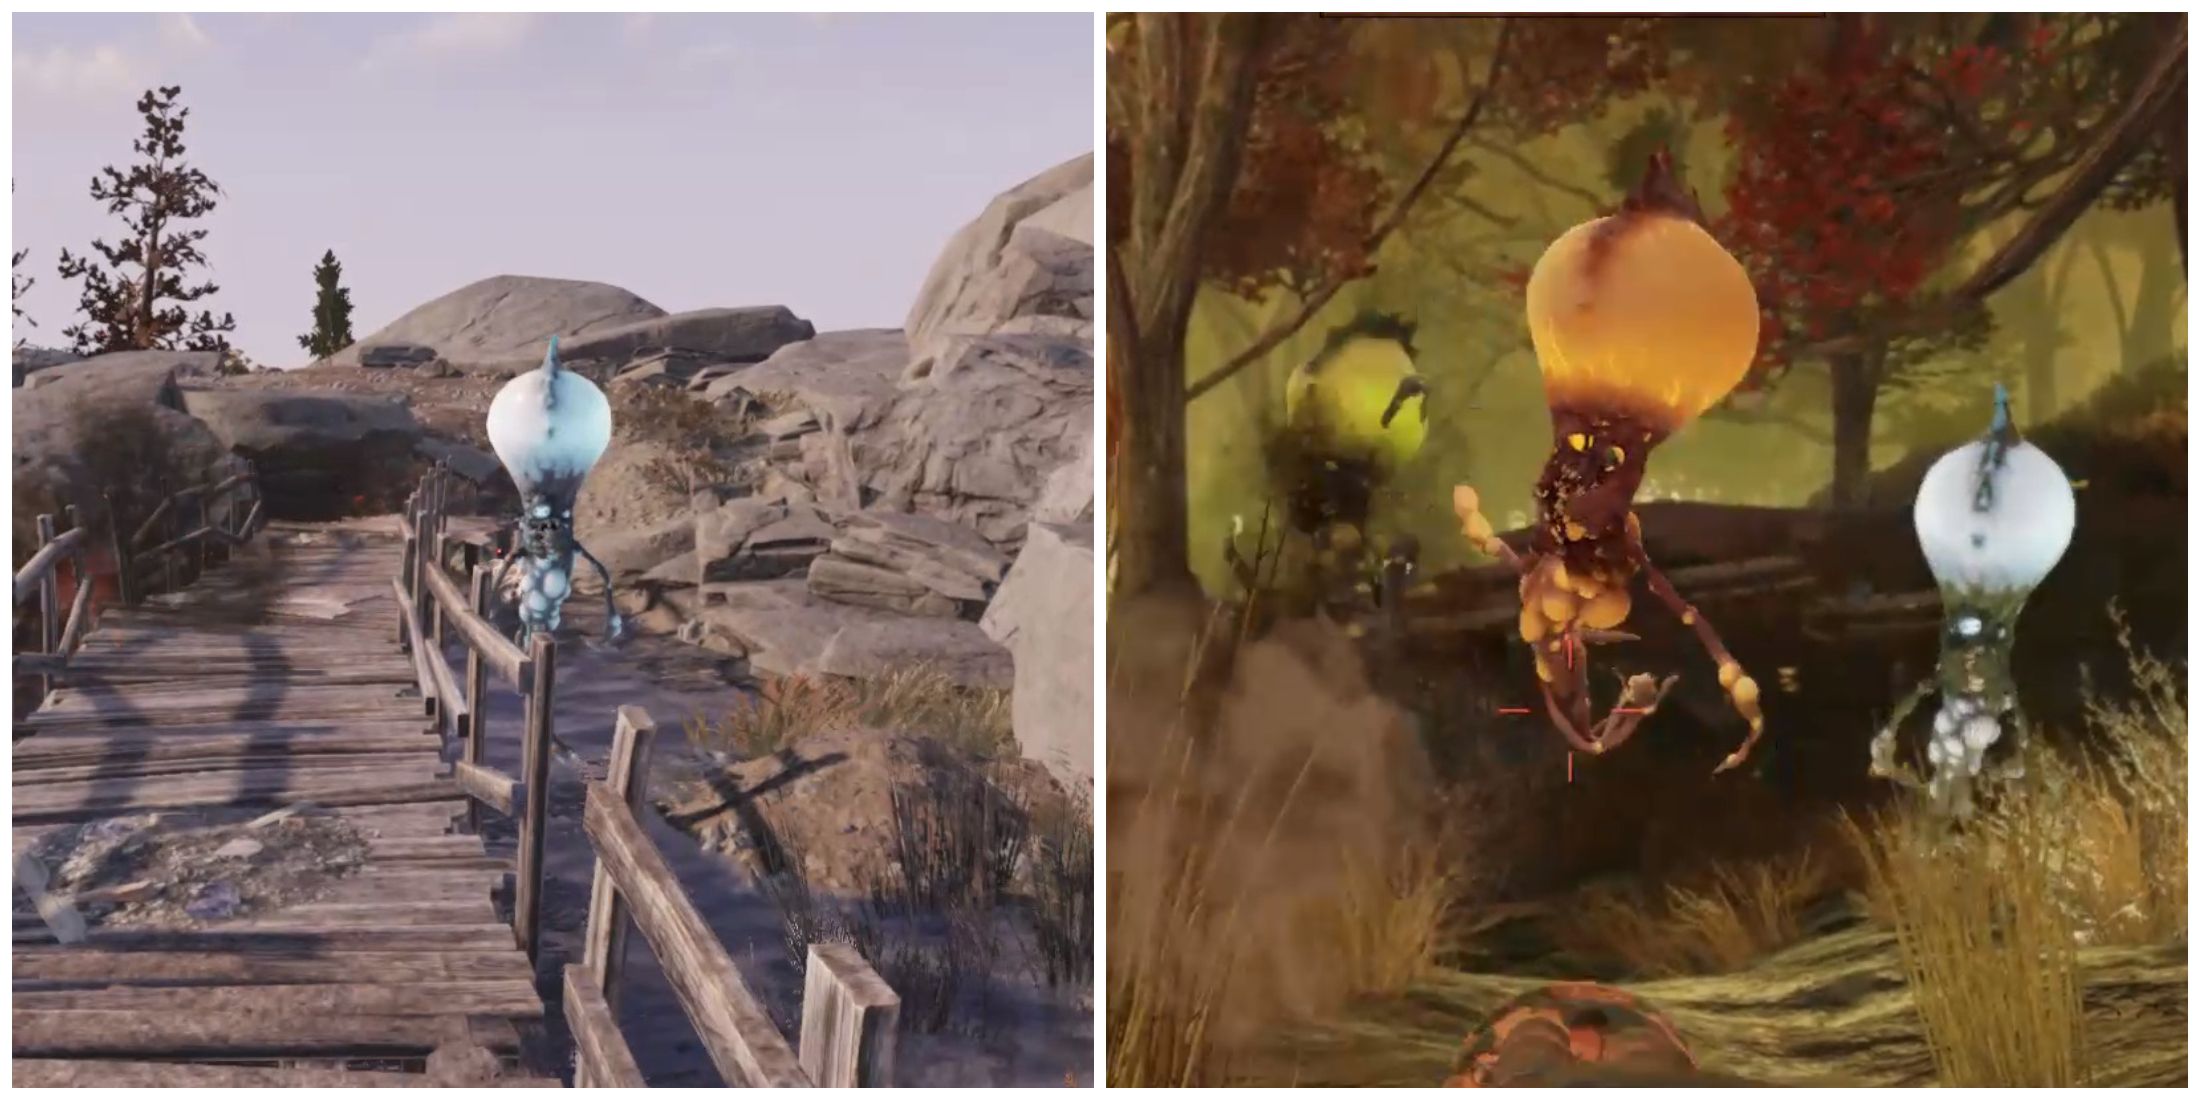 Split image of a Floater Freezer and some Floater Enemies in Fallout 76